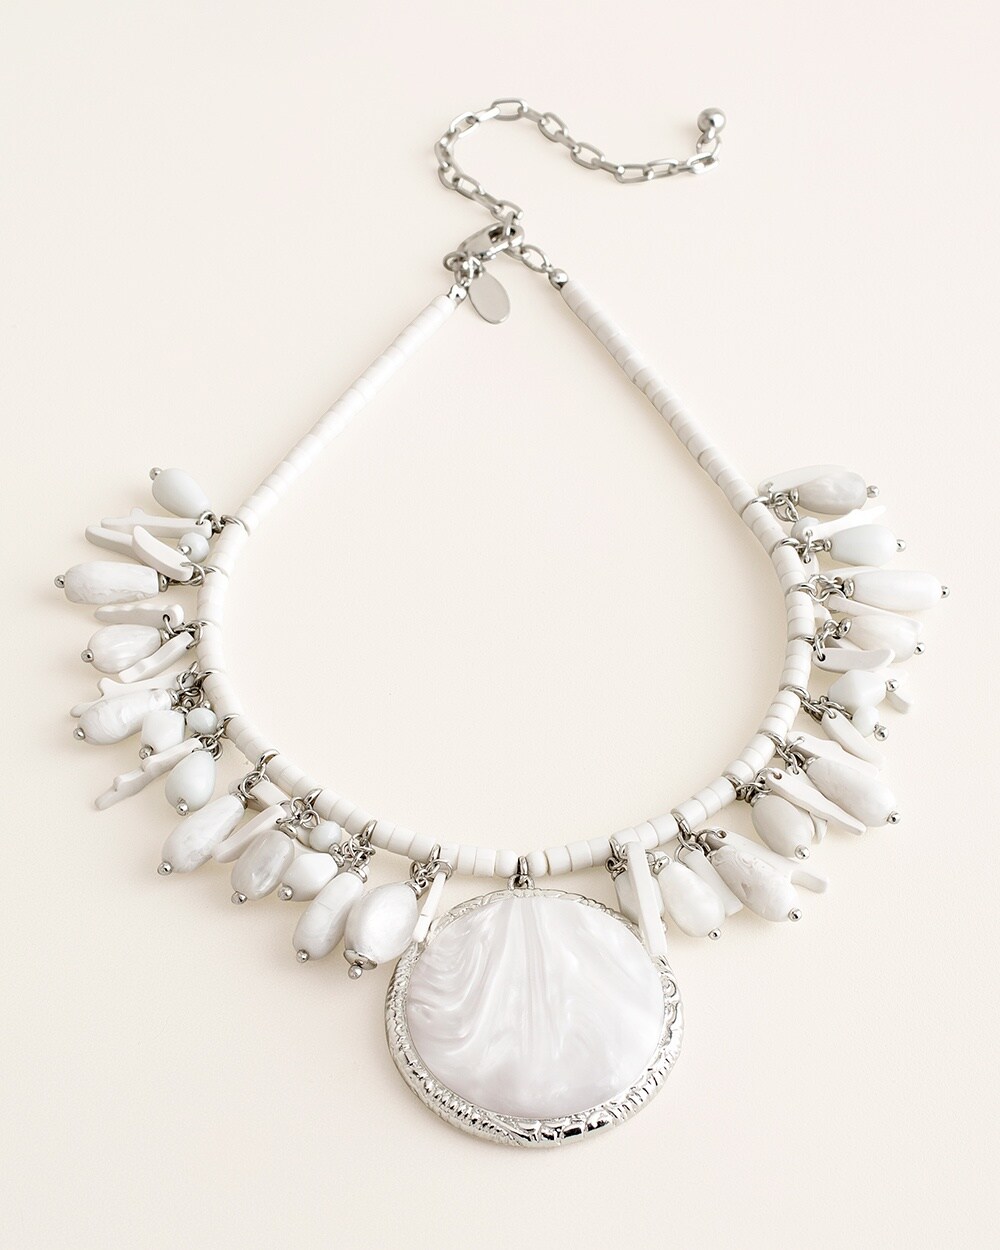 Short White and Silver-Tone Pendant Necklace